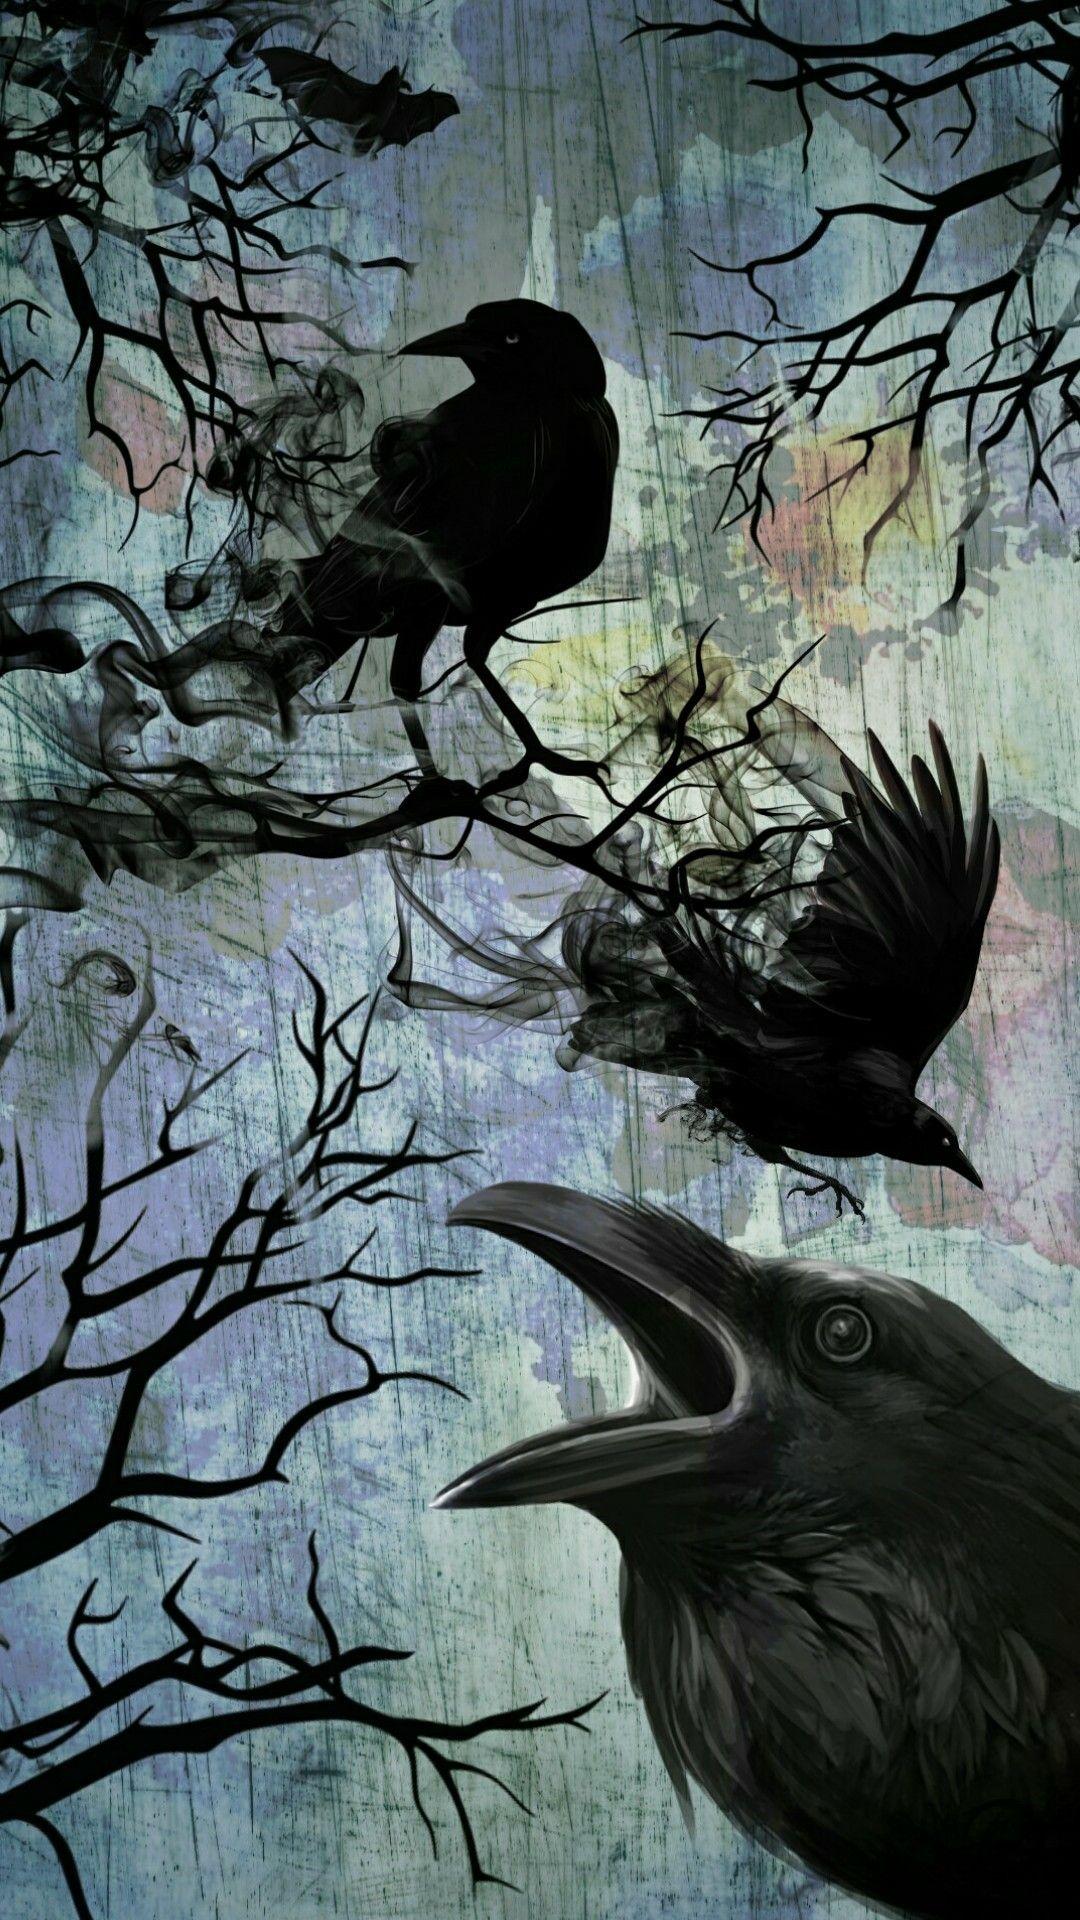 1080 x 1920 · jpeg - Pin by Carlos L. Garcia on wallpapers | Crow painting, Crow art, Raven art